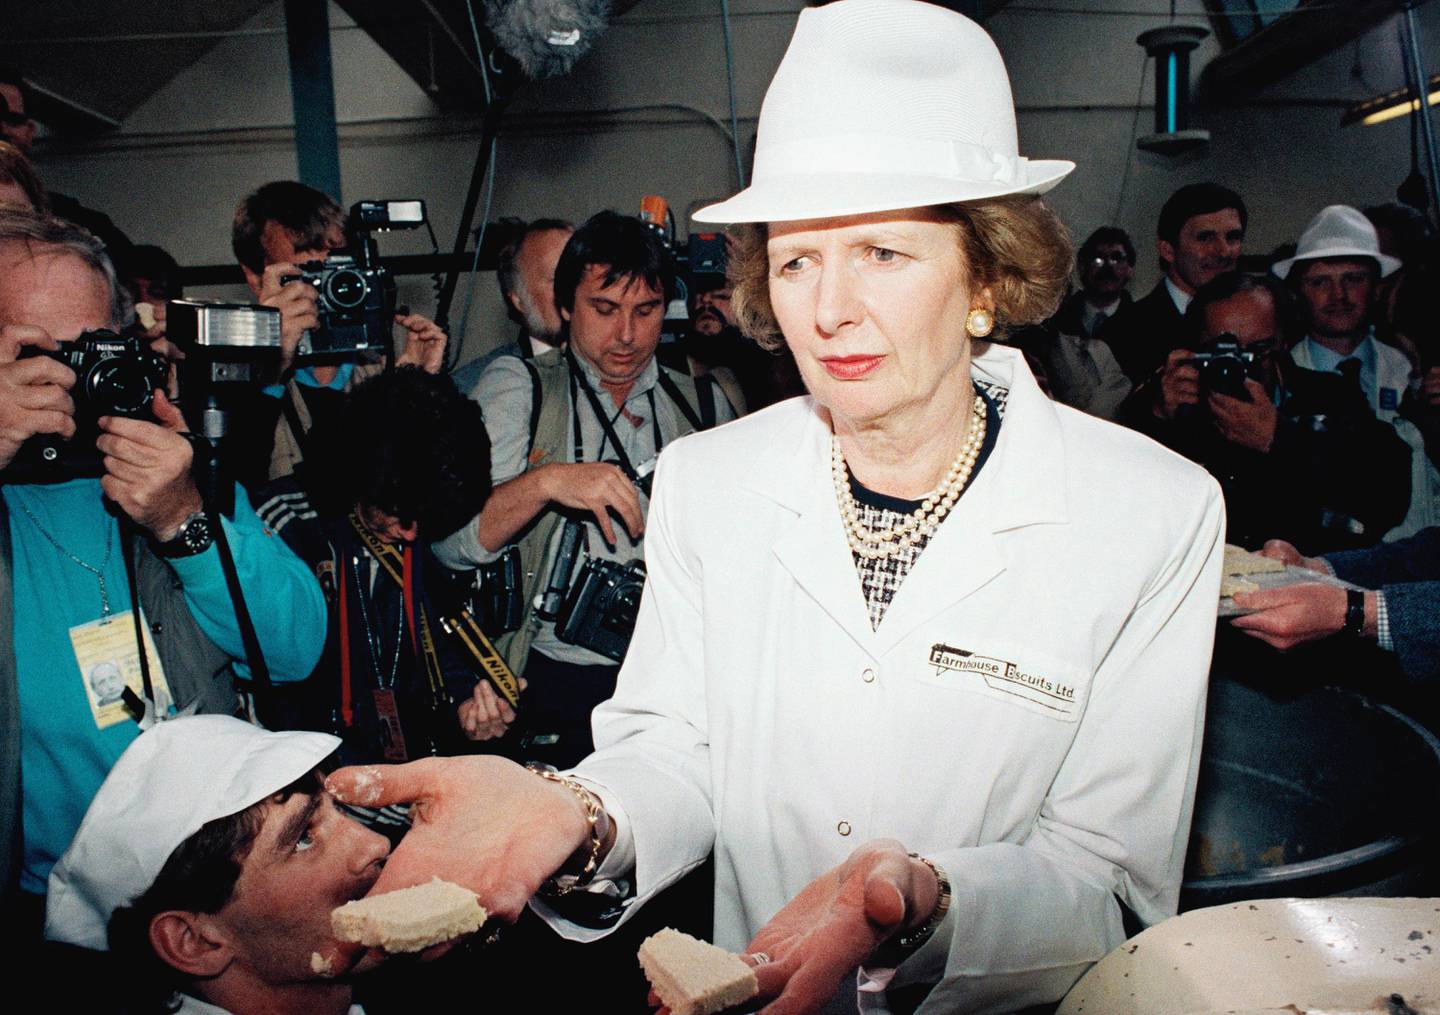 Britain?s Prime Minister Margaret Thatcher, wearing a white trilby hat and coat, hands out biscuits to photographers while touring the Farmhouse Biscuit factory at Nelson, Lancashire on Friday, May 23, 1987, during a stop on her election campaign tour. Britain goes to the polls in a General Election on June 11th. (AP Photo/Dave Caulkin)